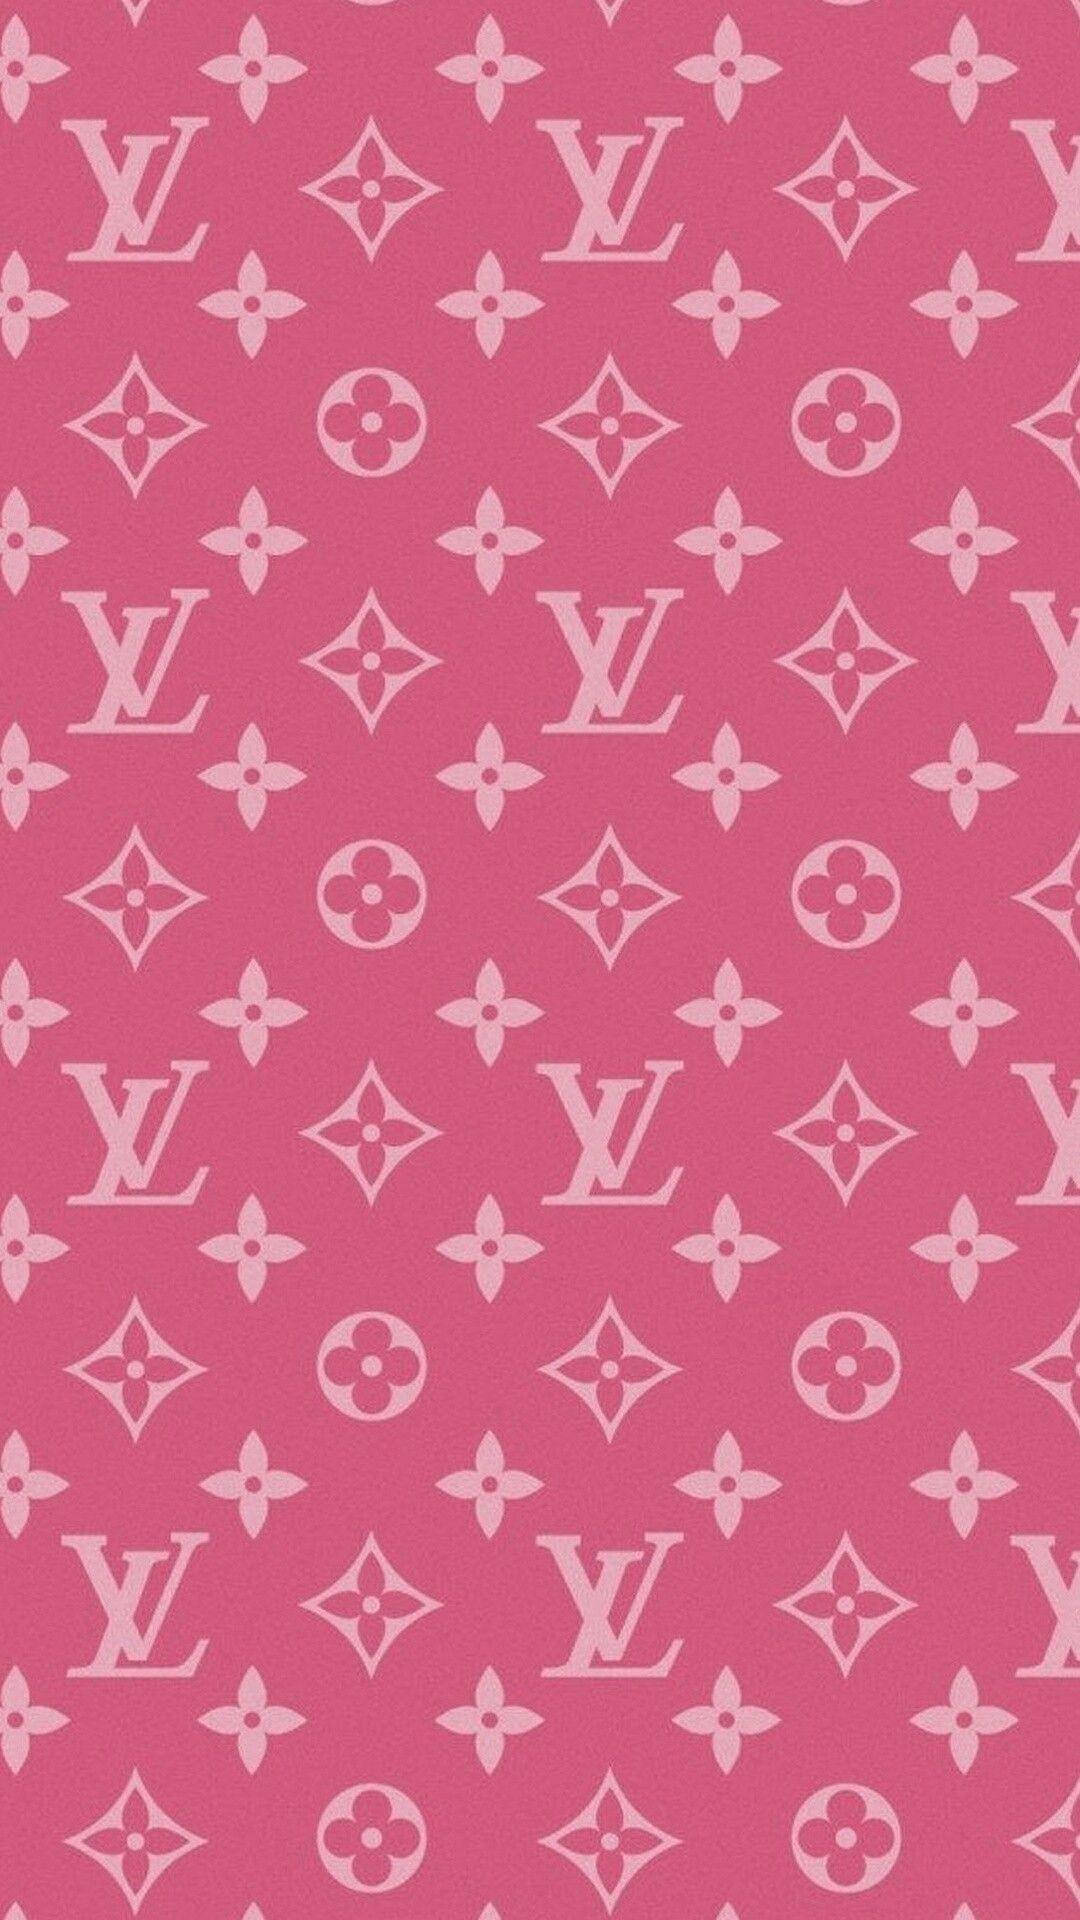 Download Image A beautiful, brown Louis Vuitton piece shown in all its  plush sophistication. Wallpaper